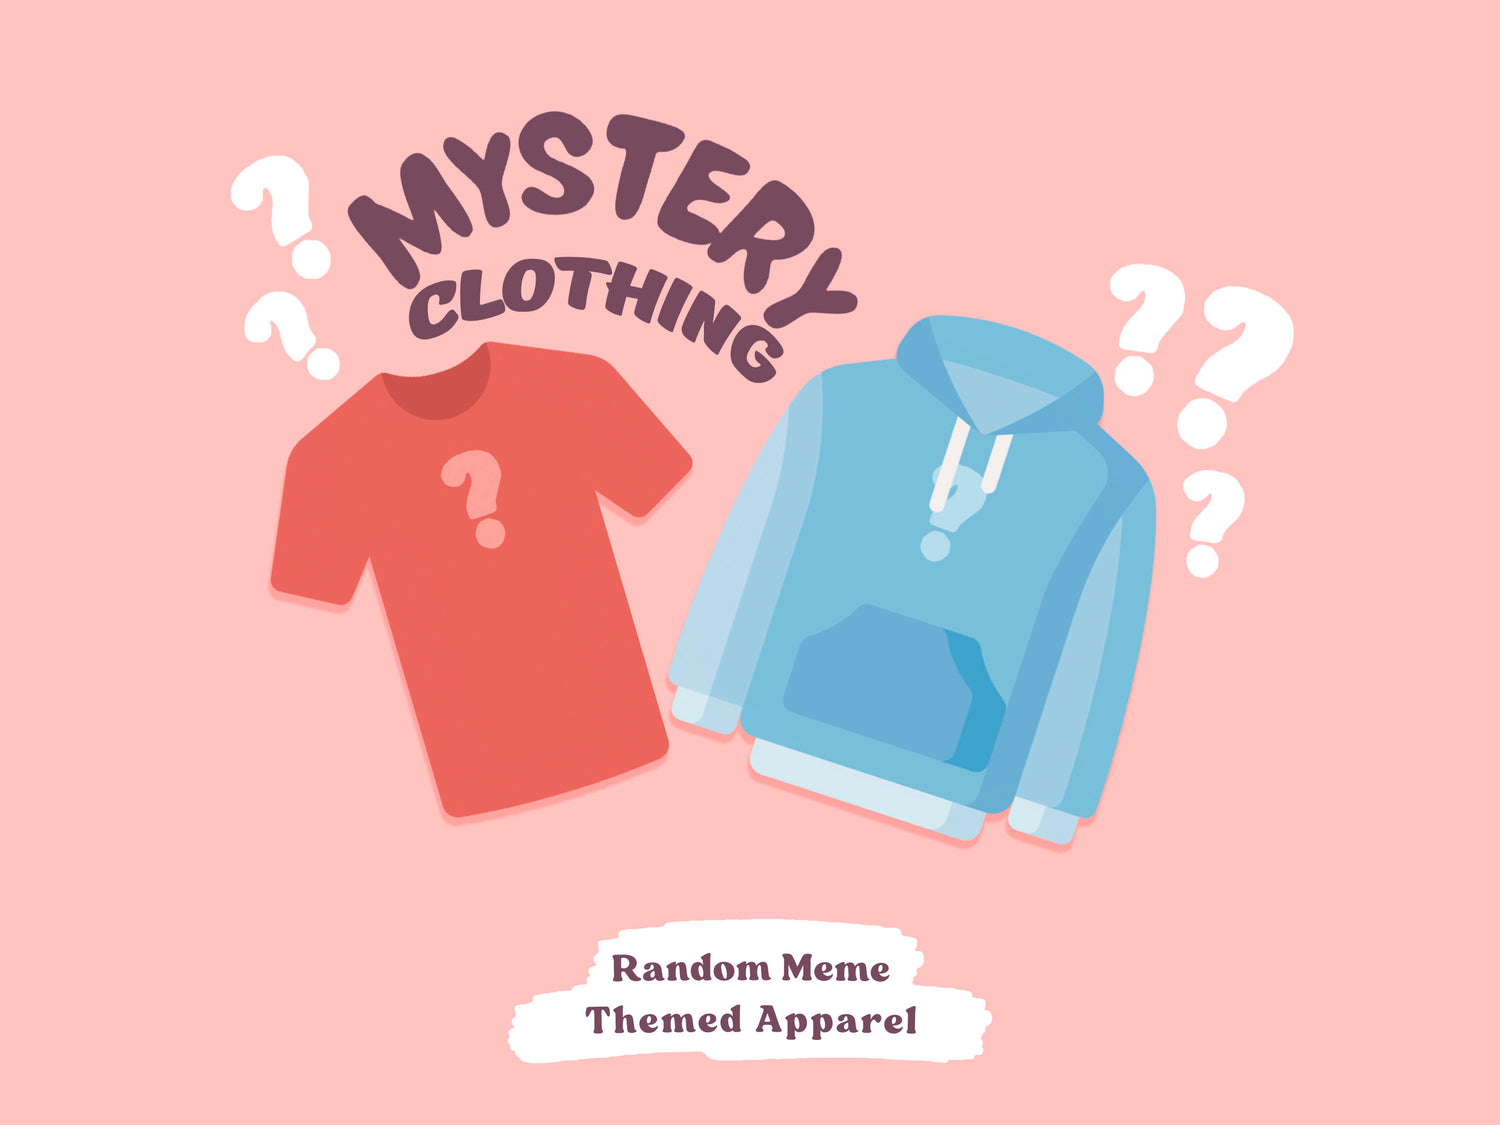 A red t-shirt and blue hoodie illustration surrounded by question marks and the text mystery clothing random meme themed apparel 